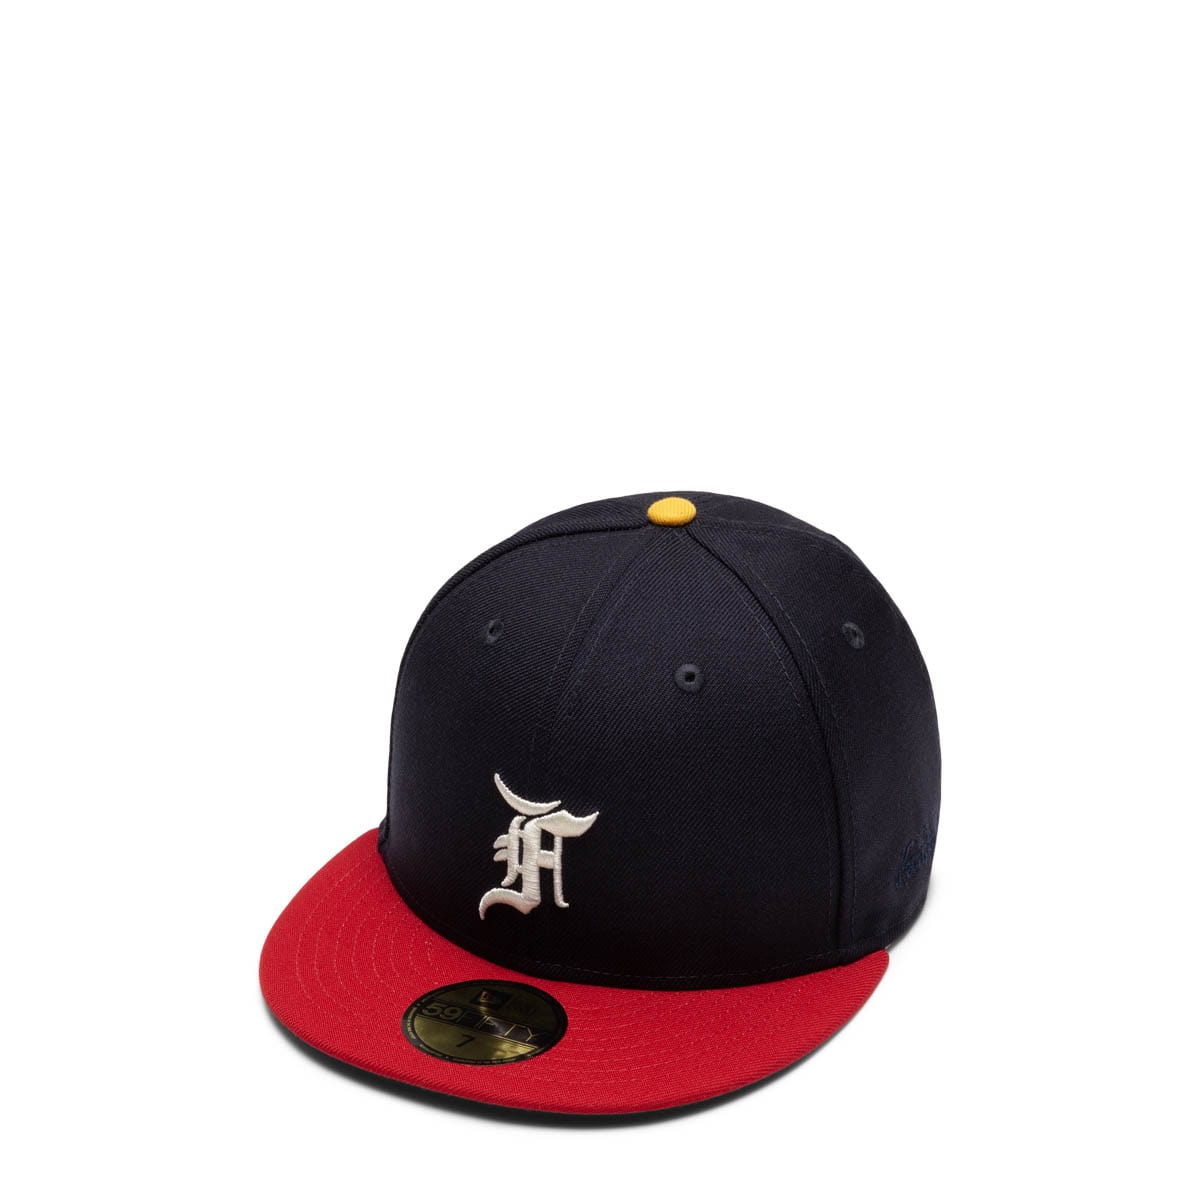 New Era x Essentials by Fear of God 59FIFTY Fitted Cap (Navy